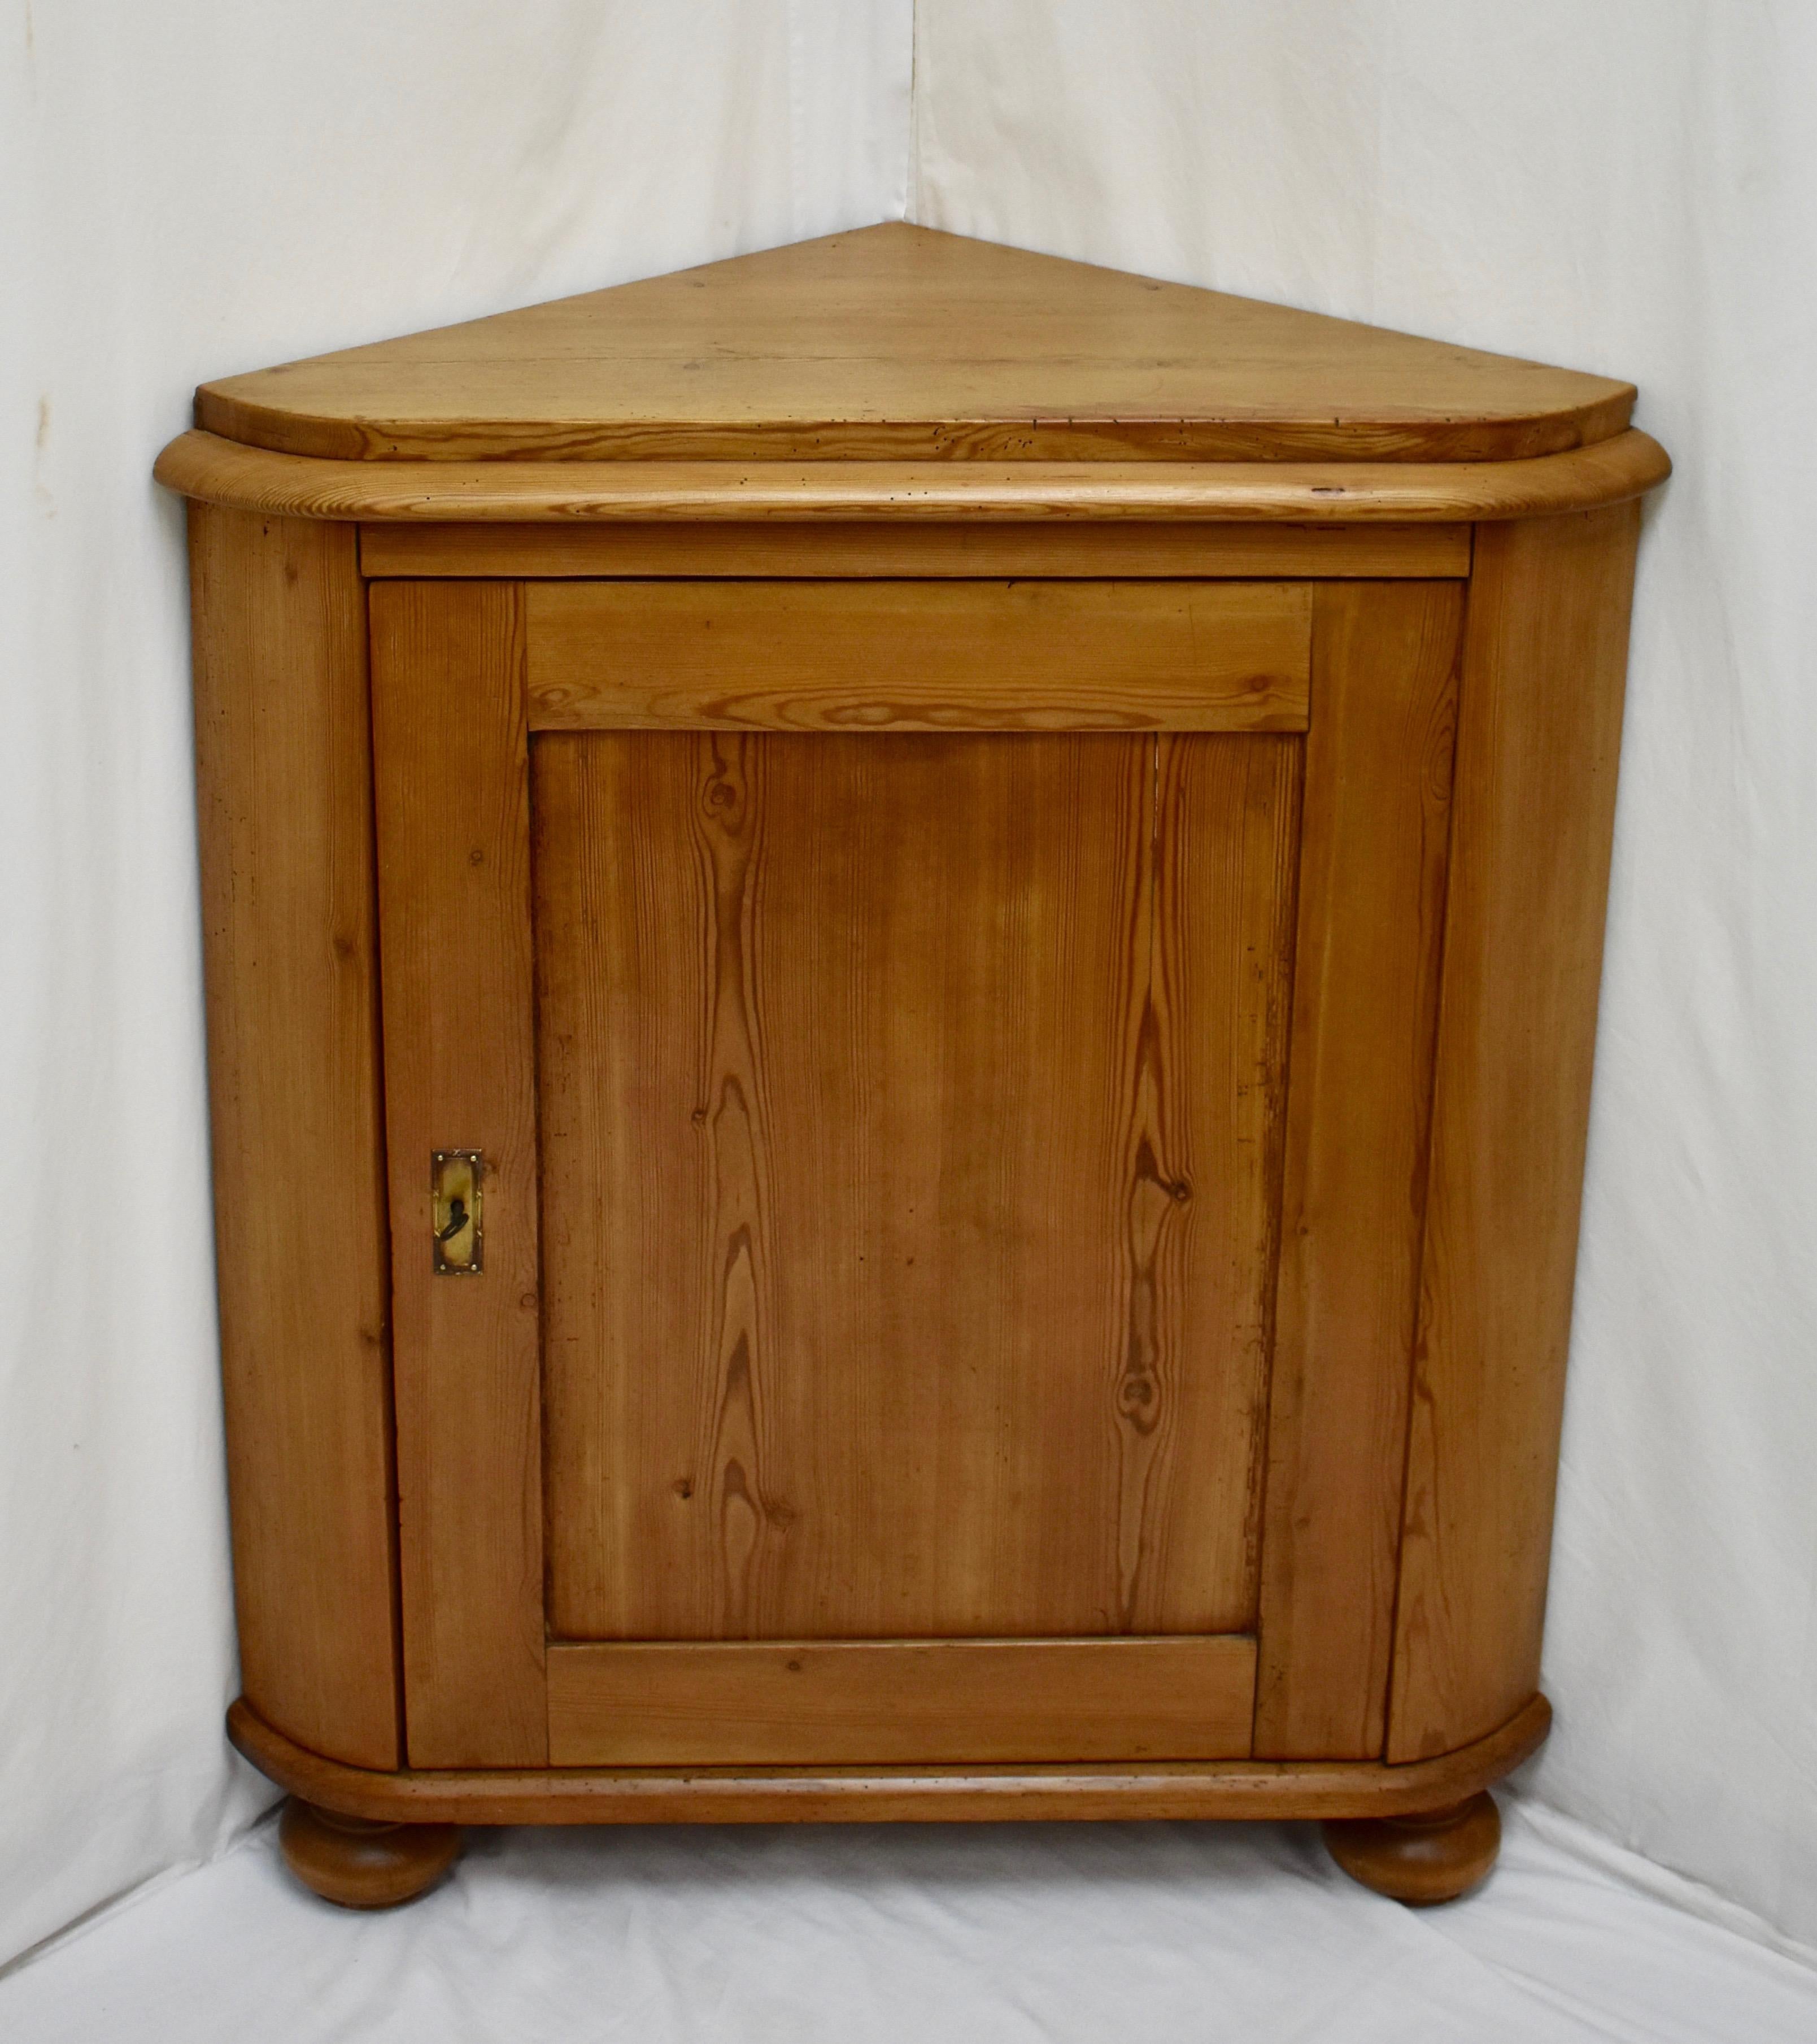 This is a lovely little corner cupboard. Beneath a thick top runs a bold bullnose molding. The flat paneled door below is as plain as they come but the front stiles are gently curved, and the door edge nicely chamfered for a good fit, adding an